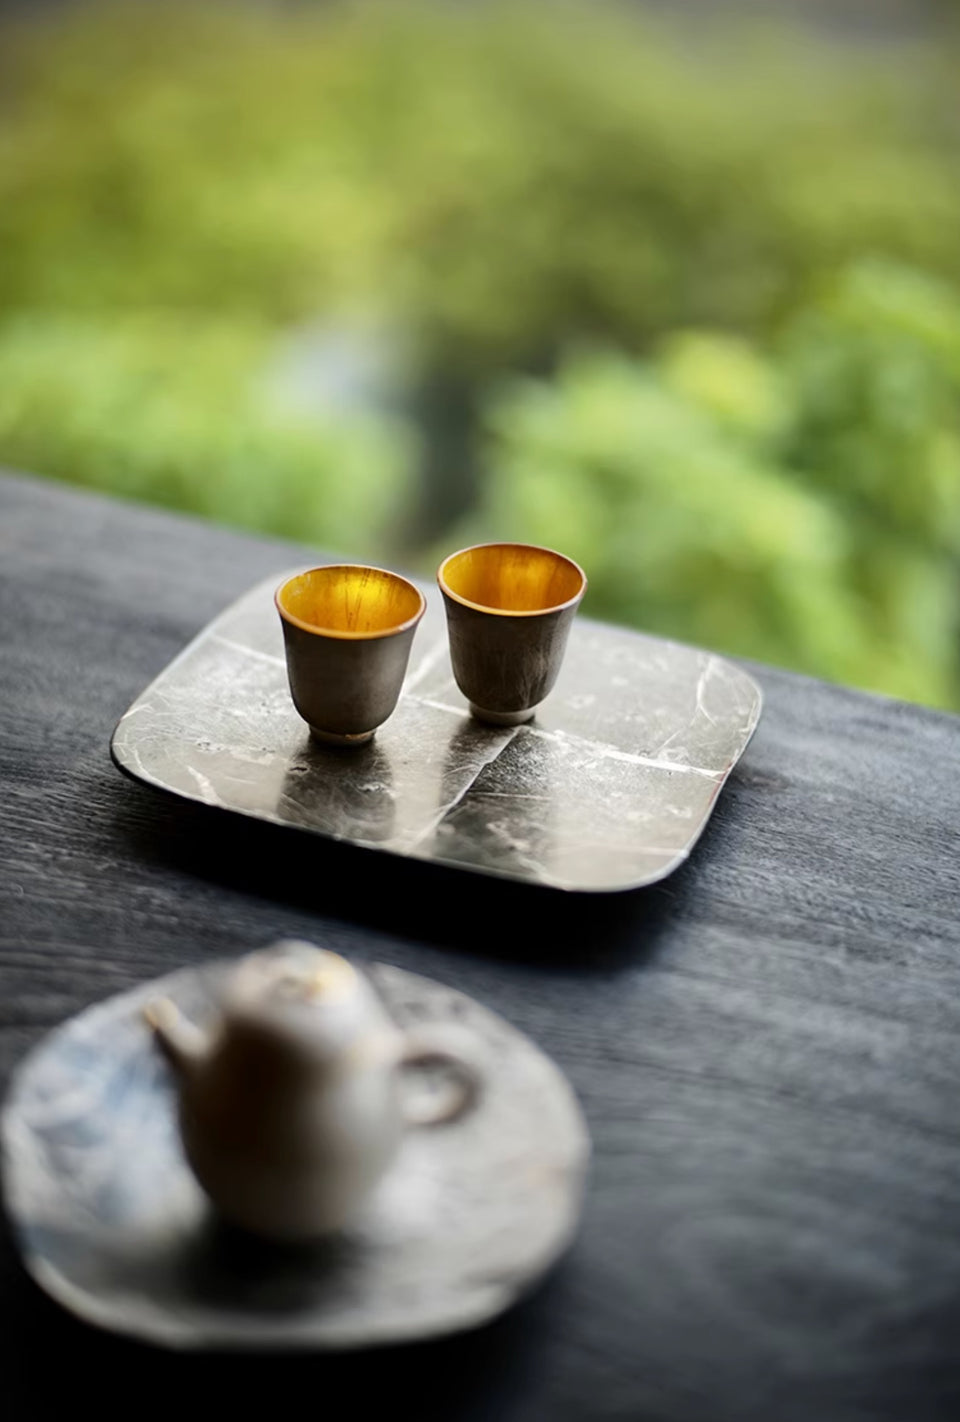 "Huang Lian" Glass Tea Cups - Gold and Burnished Silver